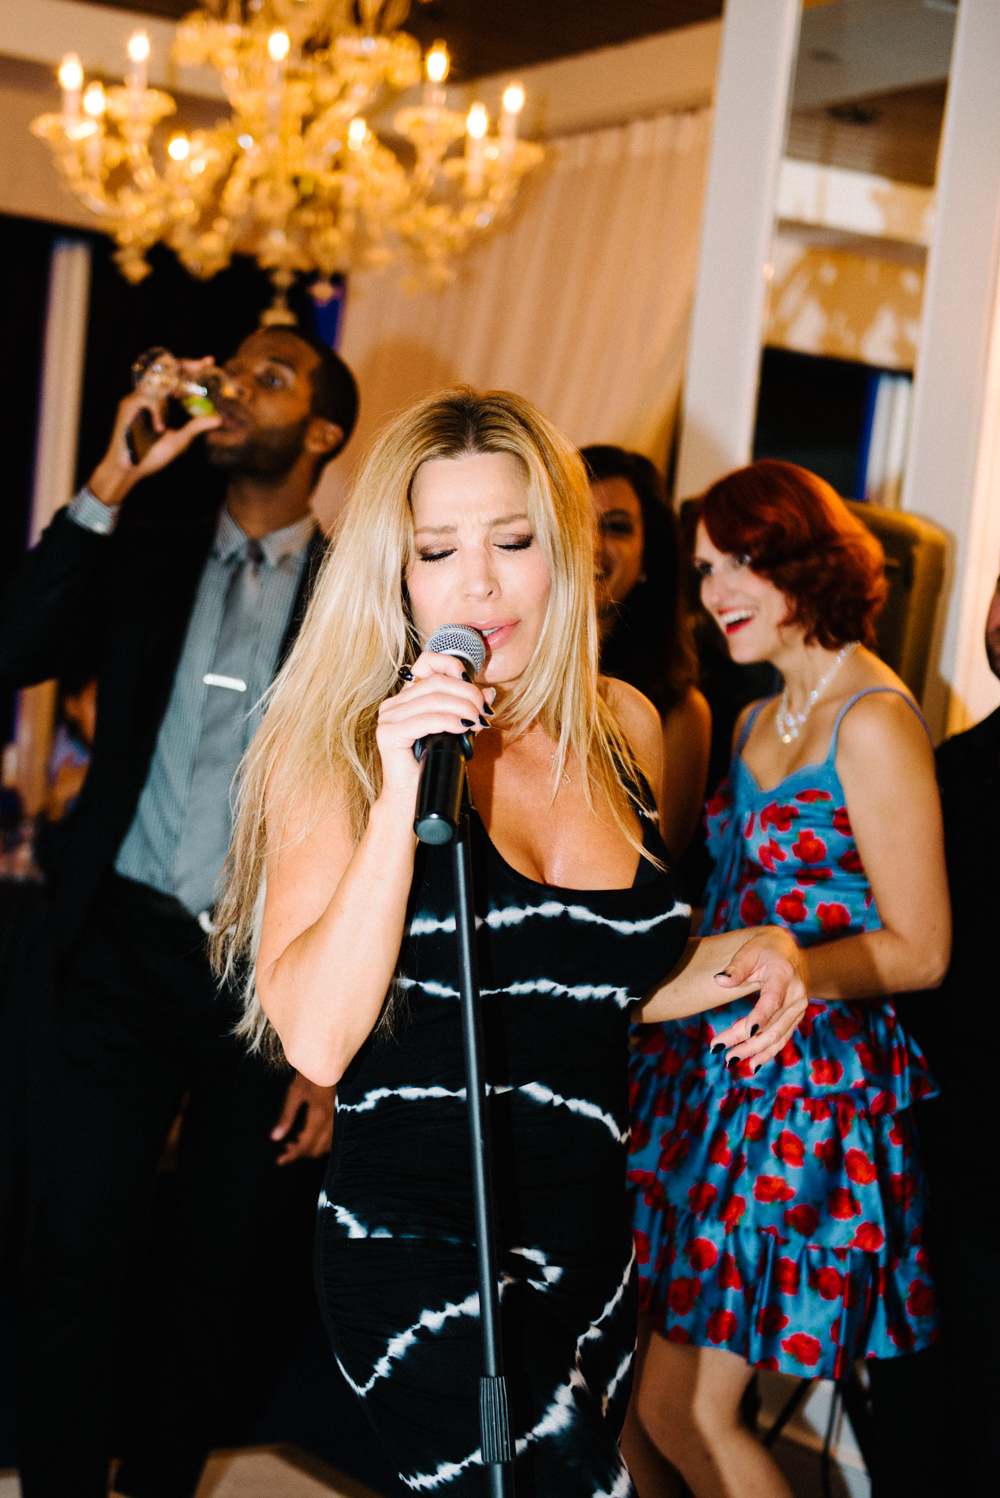 Beverly Hills Glam Wedding With Taylor Dayne Singing And A